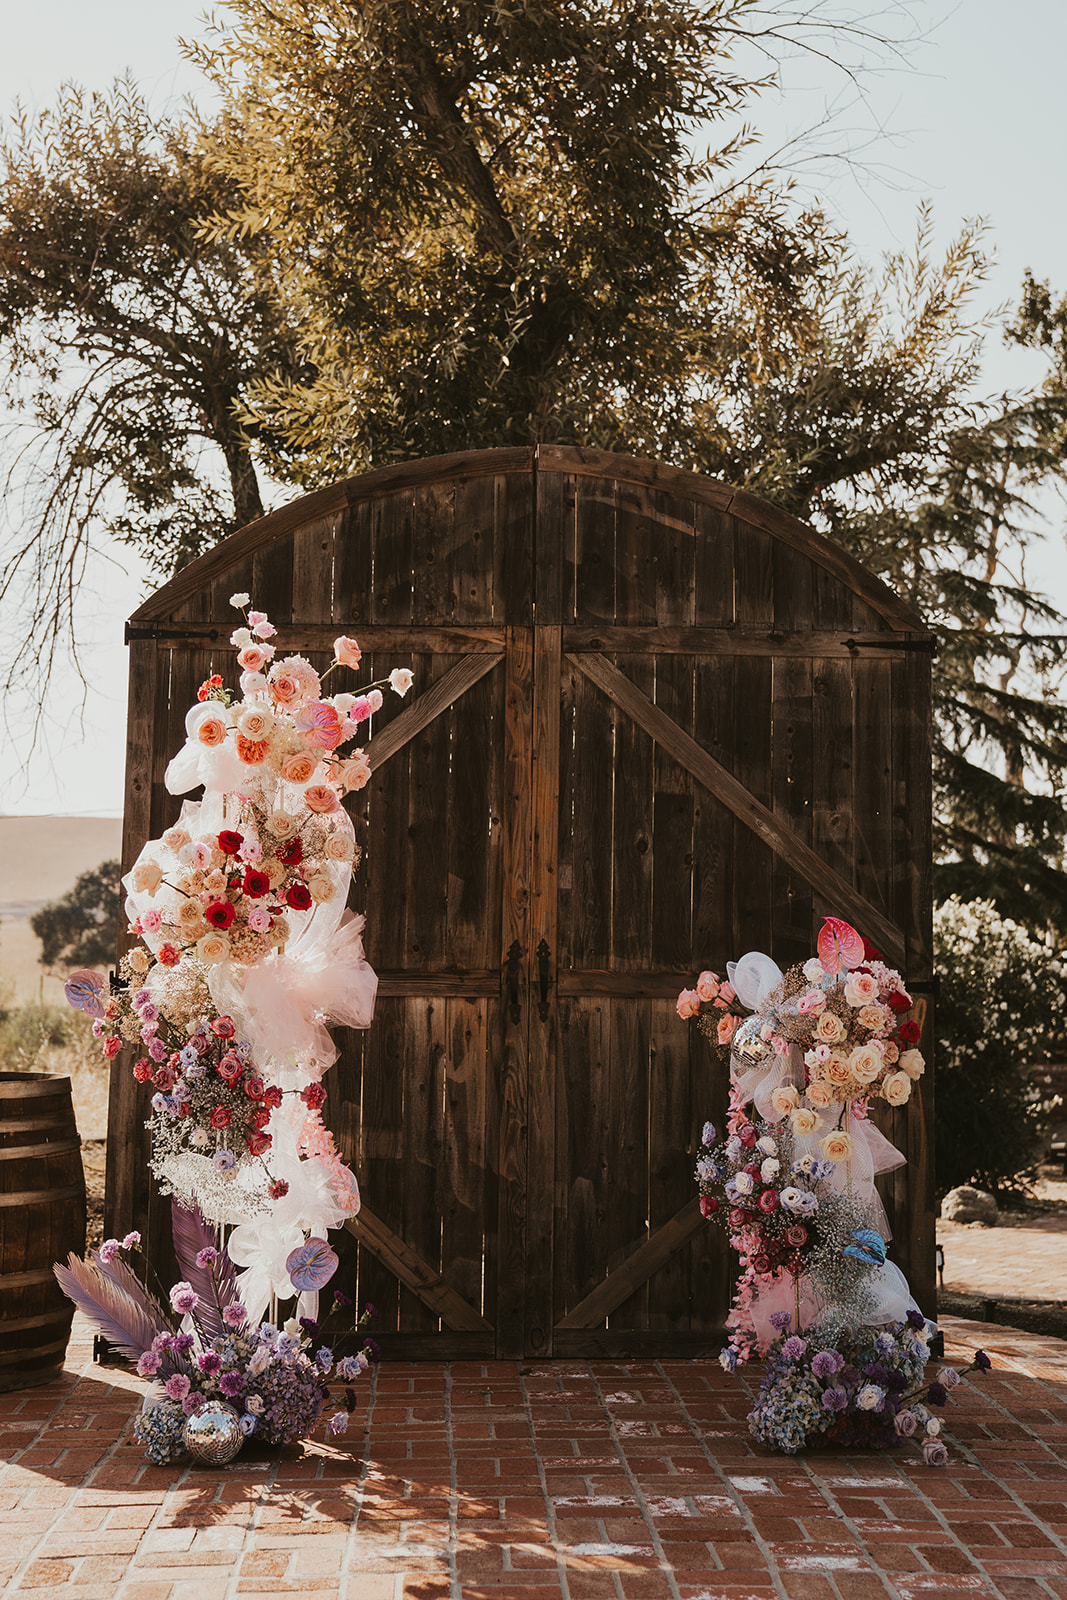 Floral arrangements at wedding altar in Livermore, California wine country